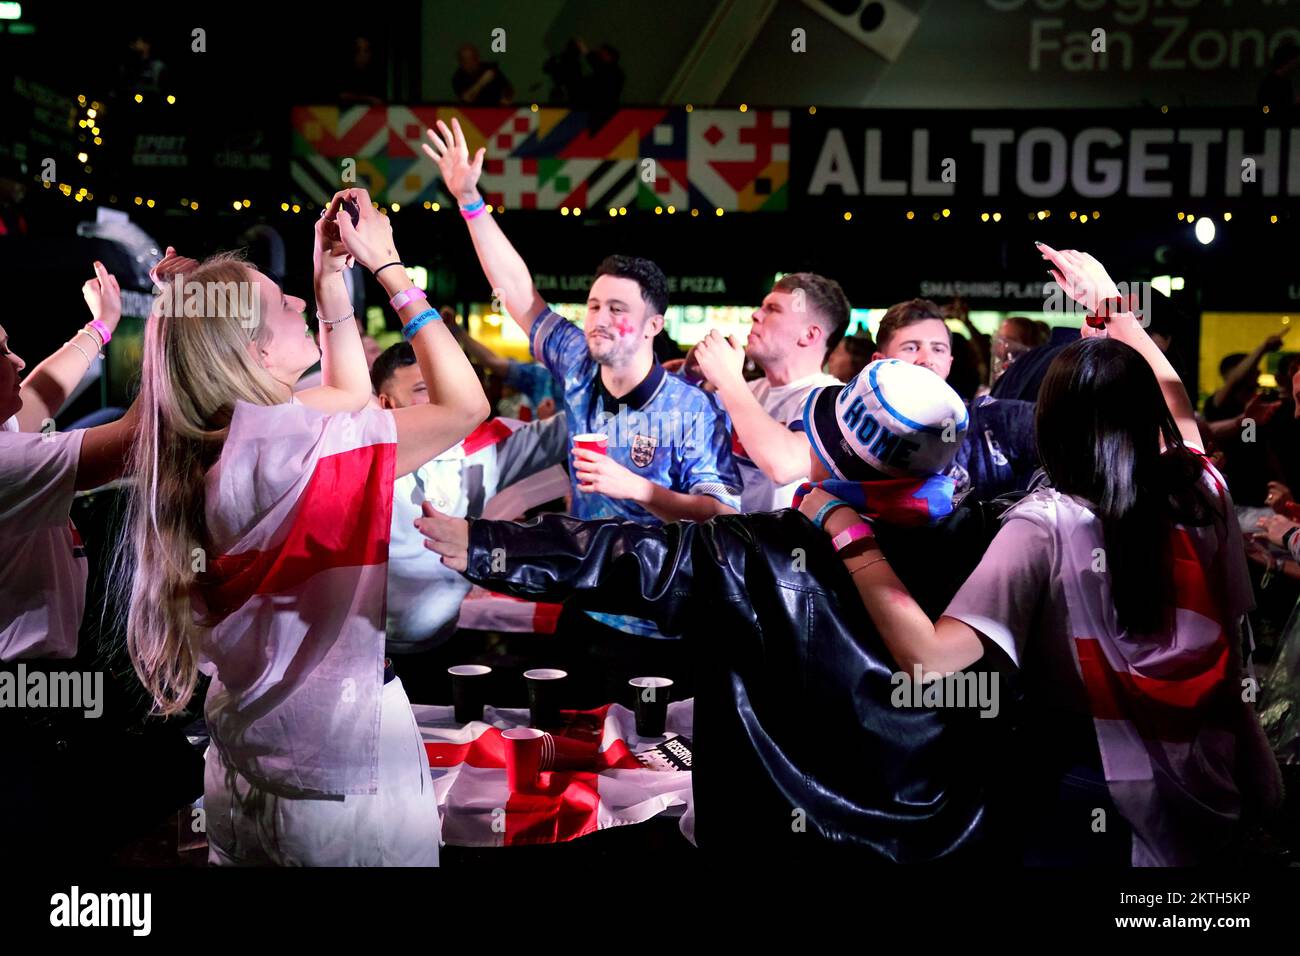 England fans celebrate after the final whistle at BoxPark Wembley, during a screening of the FIFA World Cup Group B match between Wales and England. Picture date: Tuesday November 29, 2022. Stock Photo